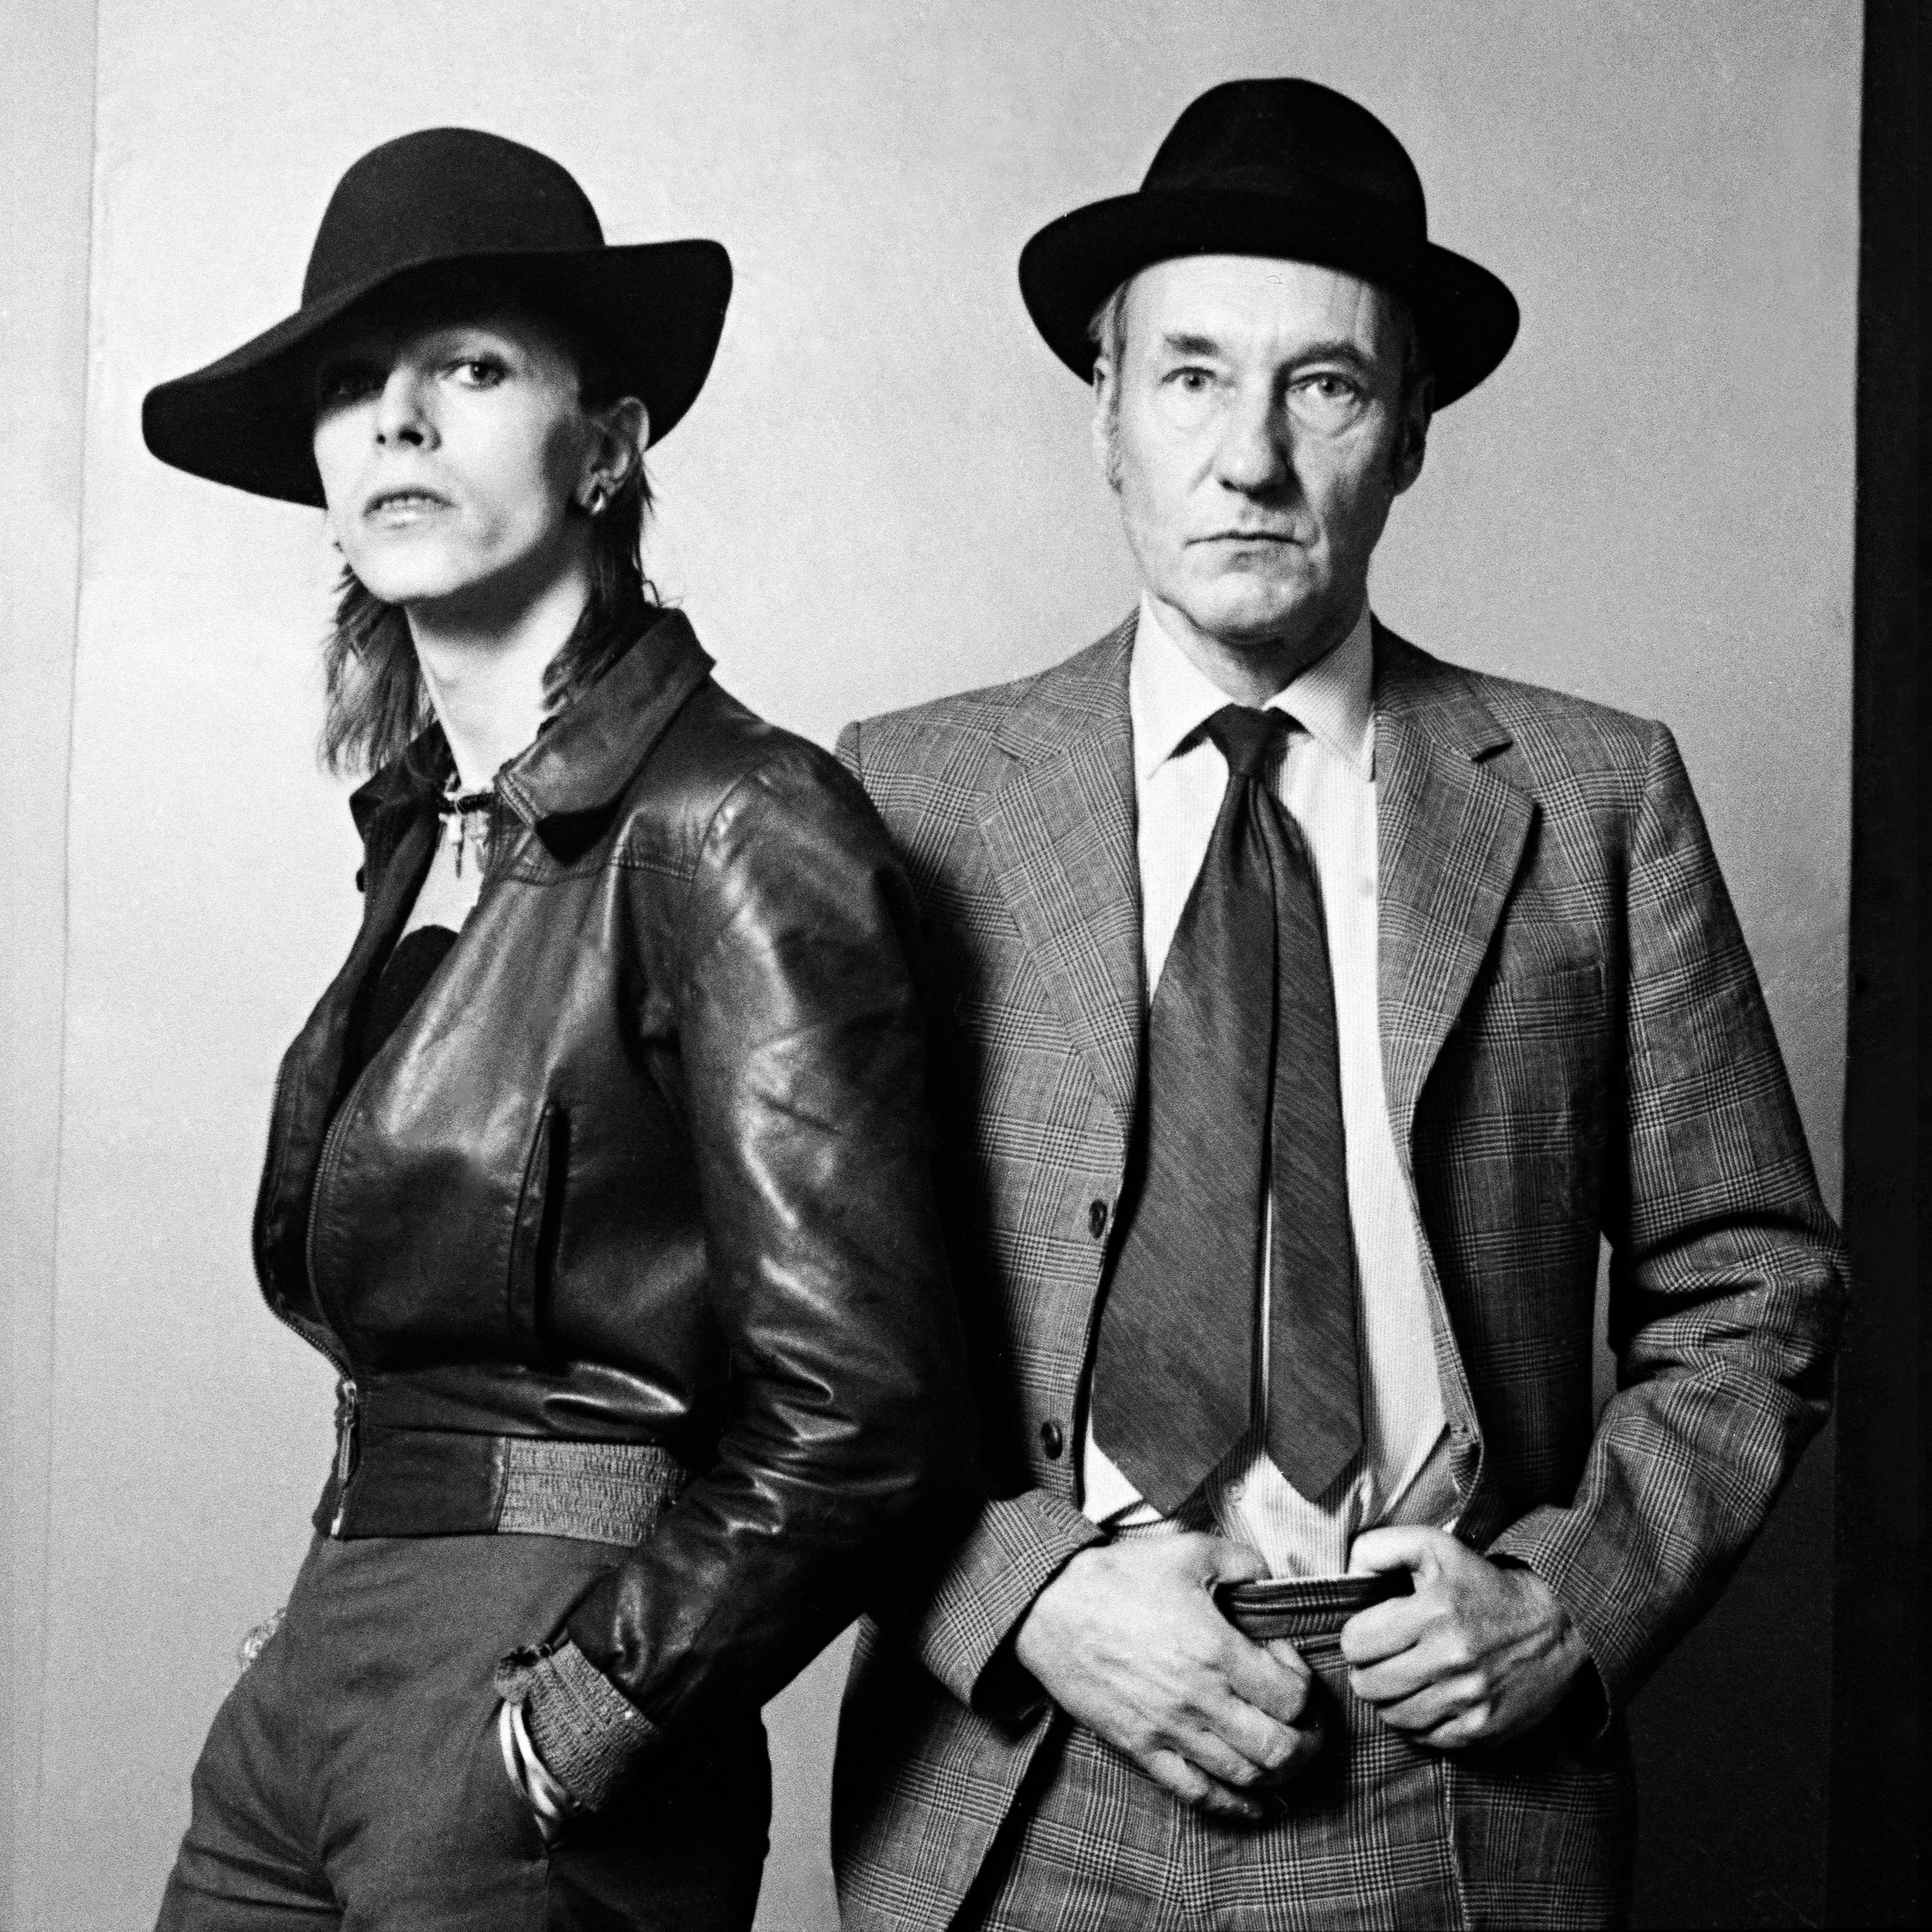 Framed, 20x24" signed lifetime edition print by Terry O'Neill of David Bowie with William Burroughs, taken for an interview published at Rolling Stone magazine in February 28, 1974.

Signed limited edition number 2/50

This 20x24" silver gelatin